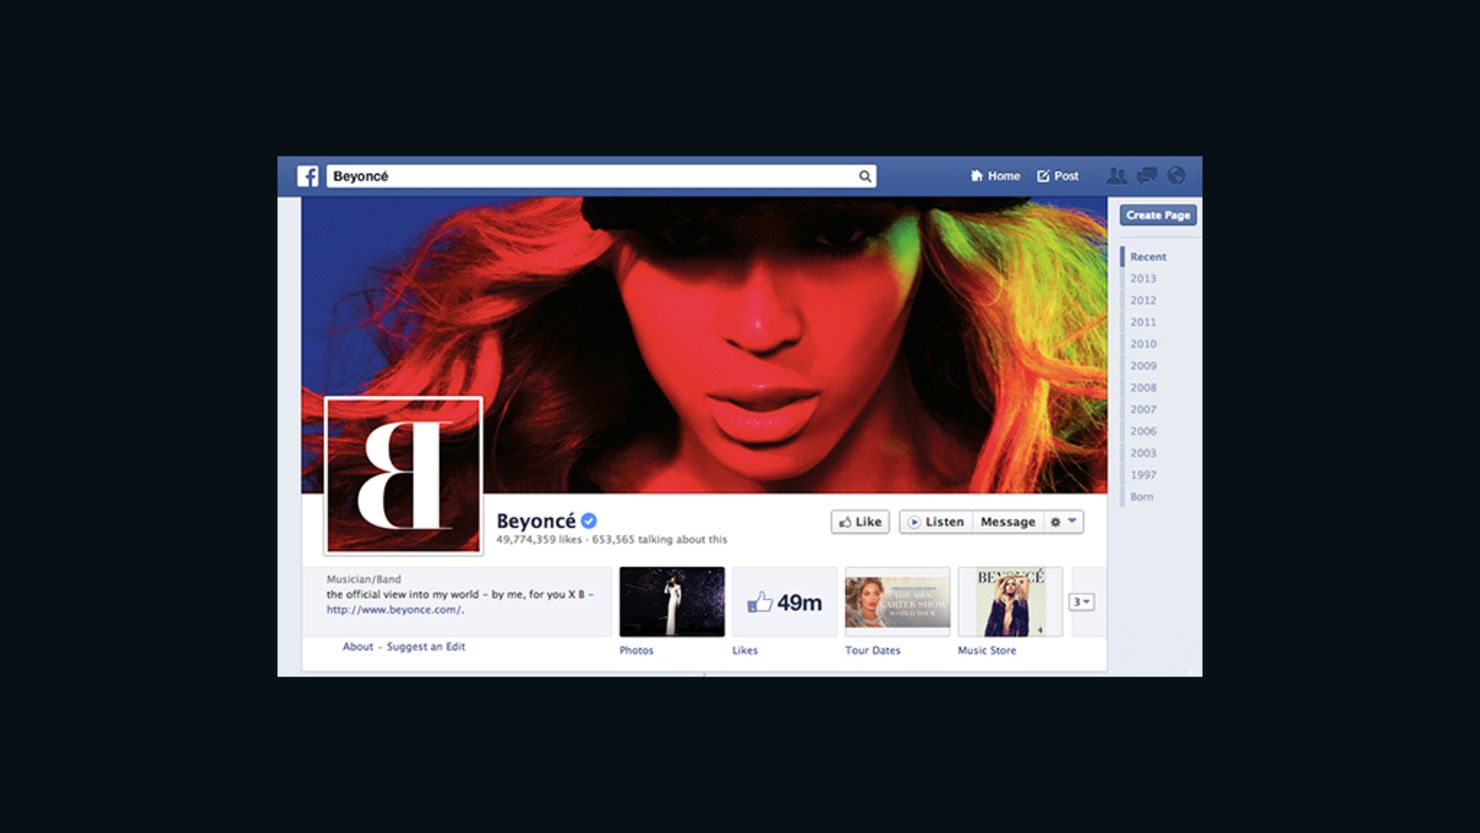 Facebook wants celebrities to interact with their fans more on the networking site.